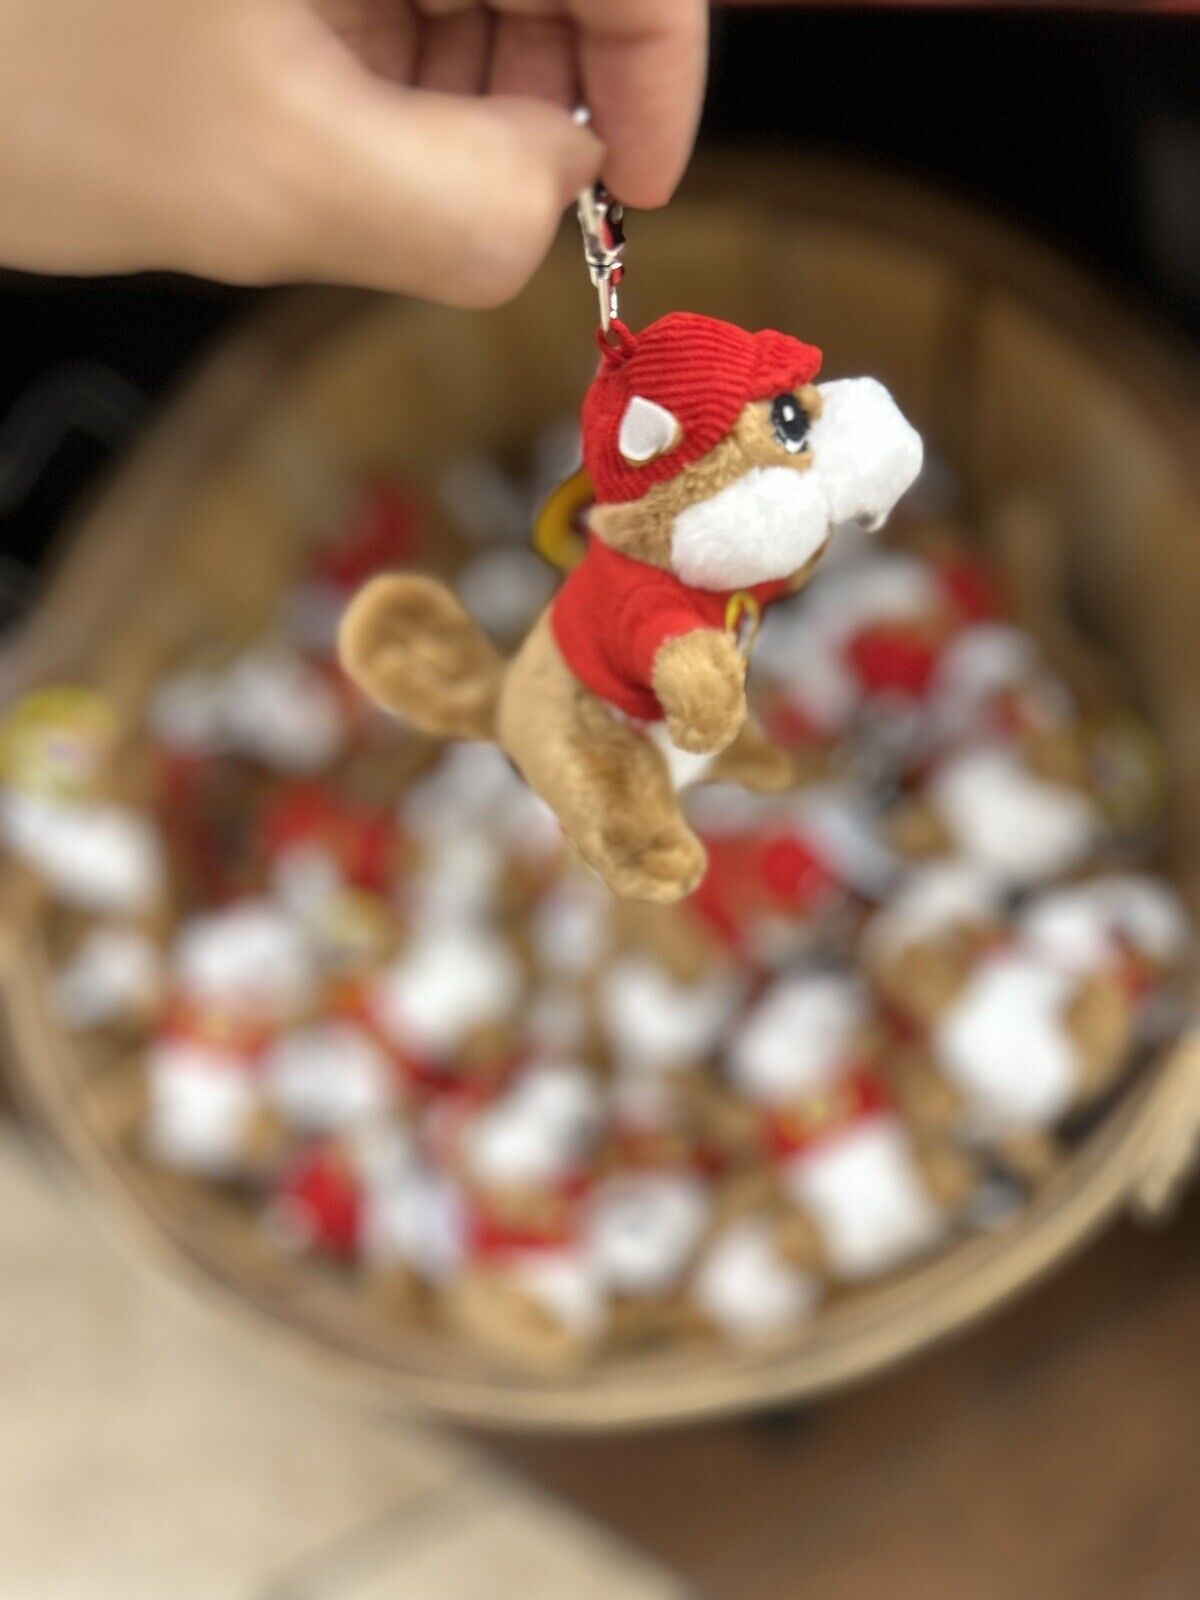 Buc-ees Keychain Souvenir Plush Good For Gift Collectibles. Buy More For Saving.